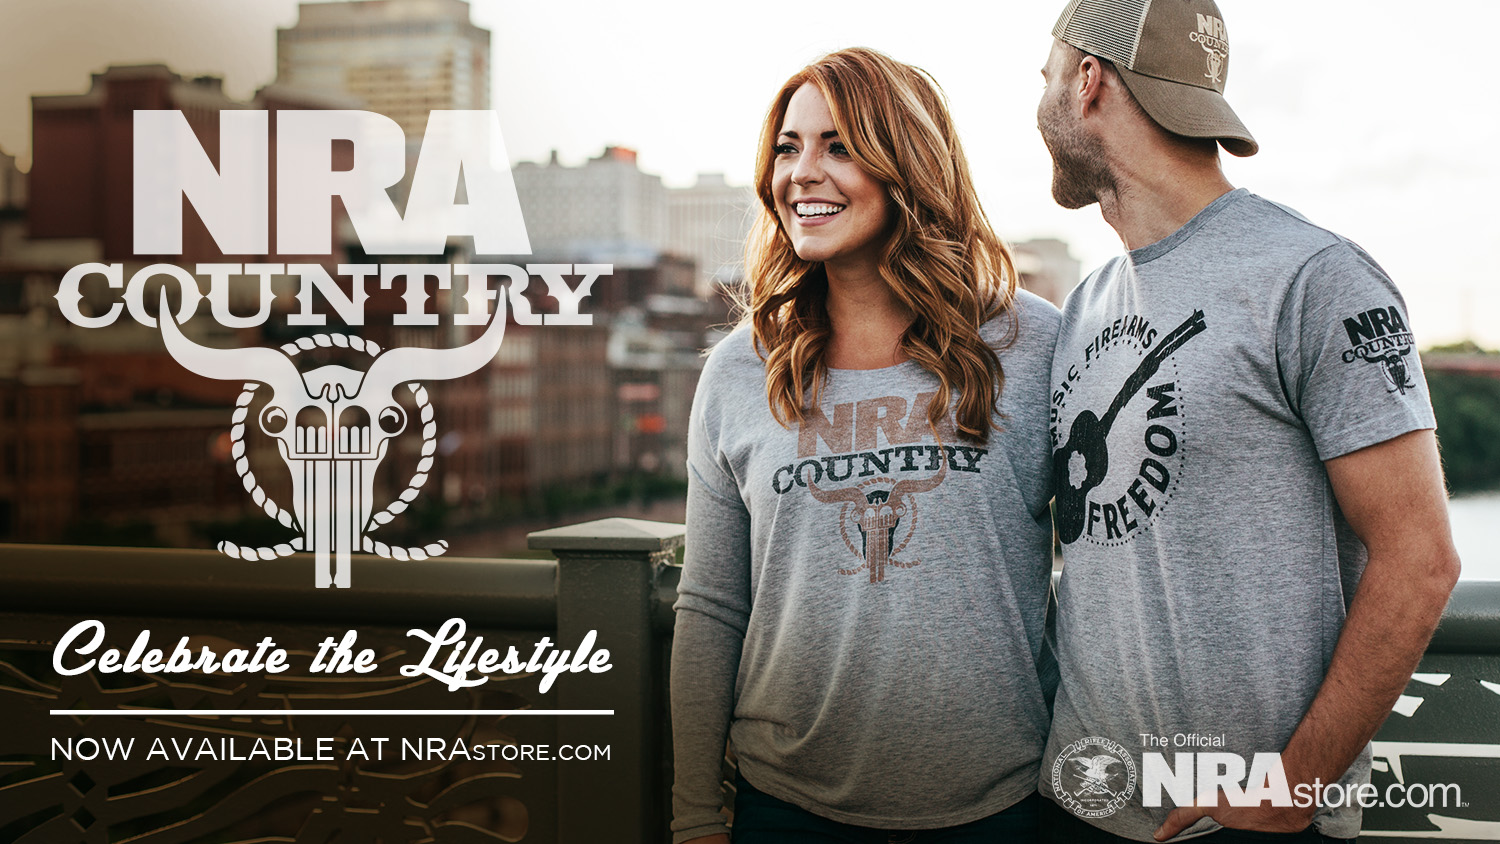 NRA Country Merchandise Now Available at NRAstore!